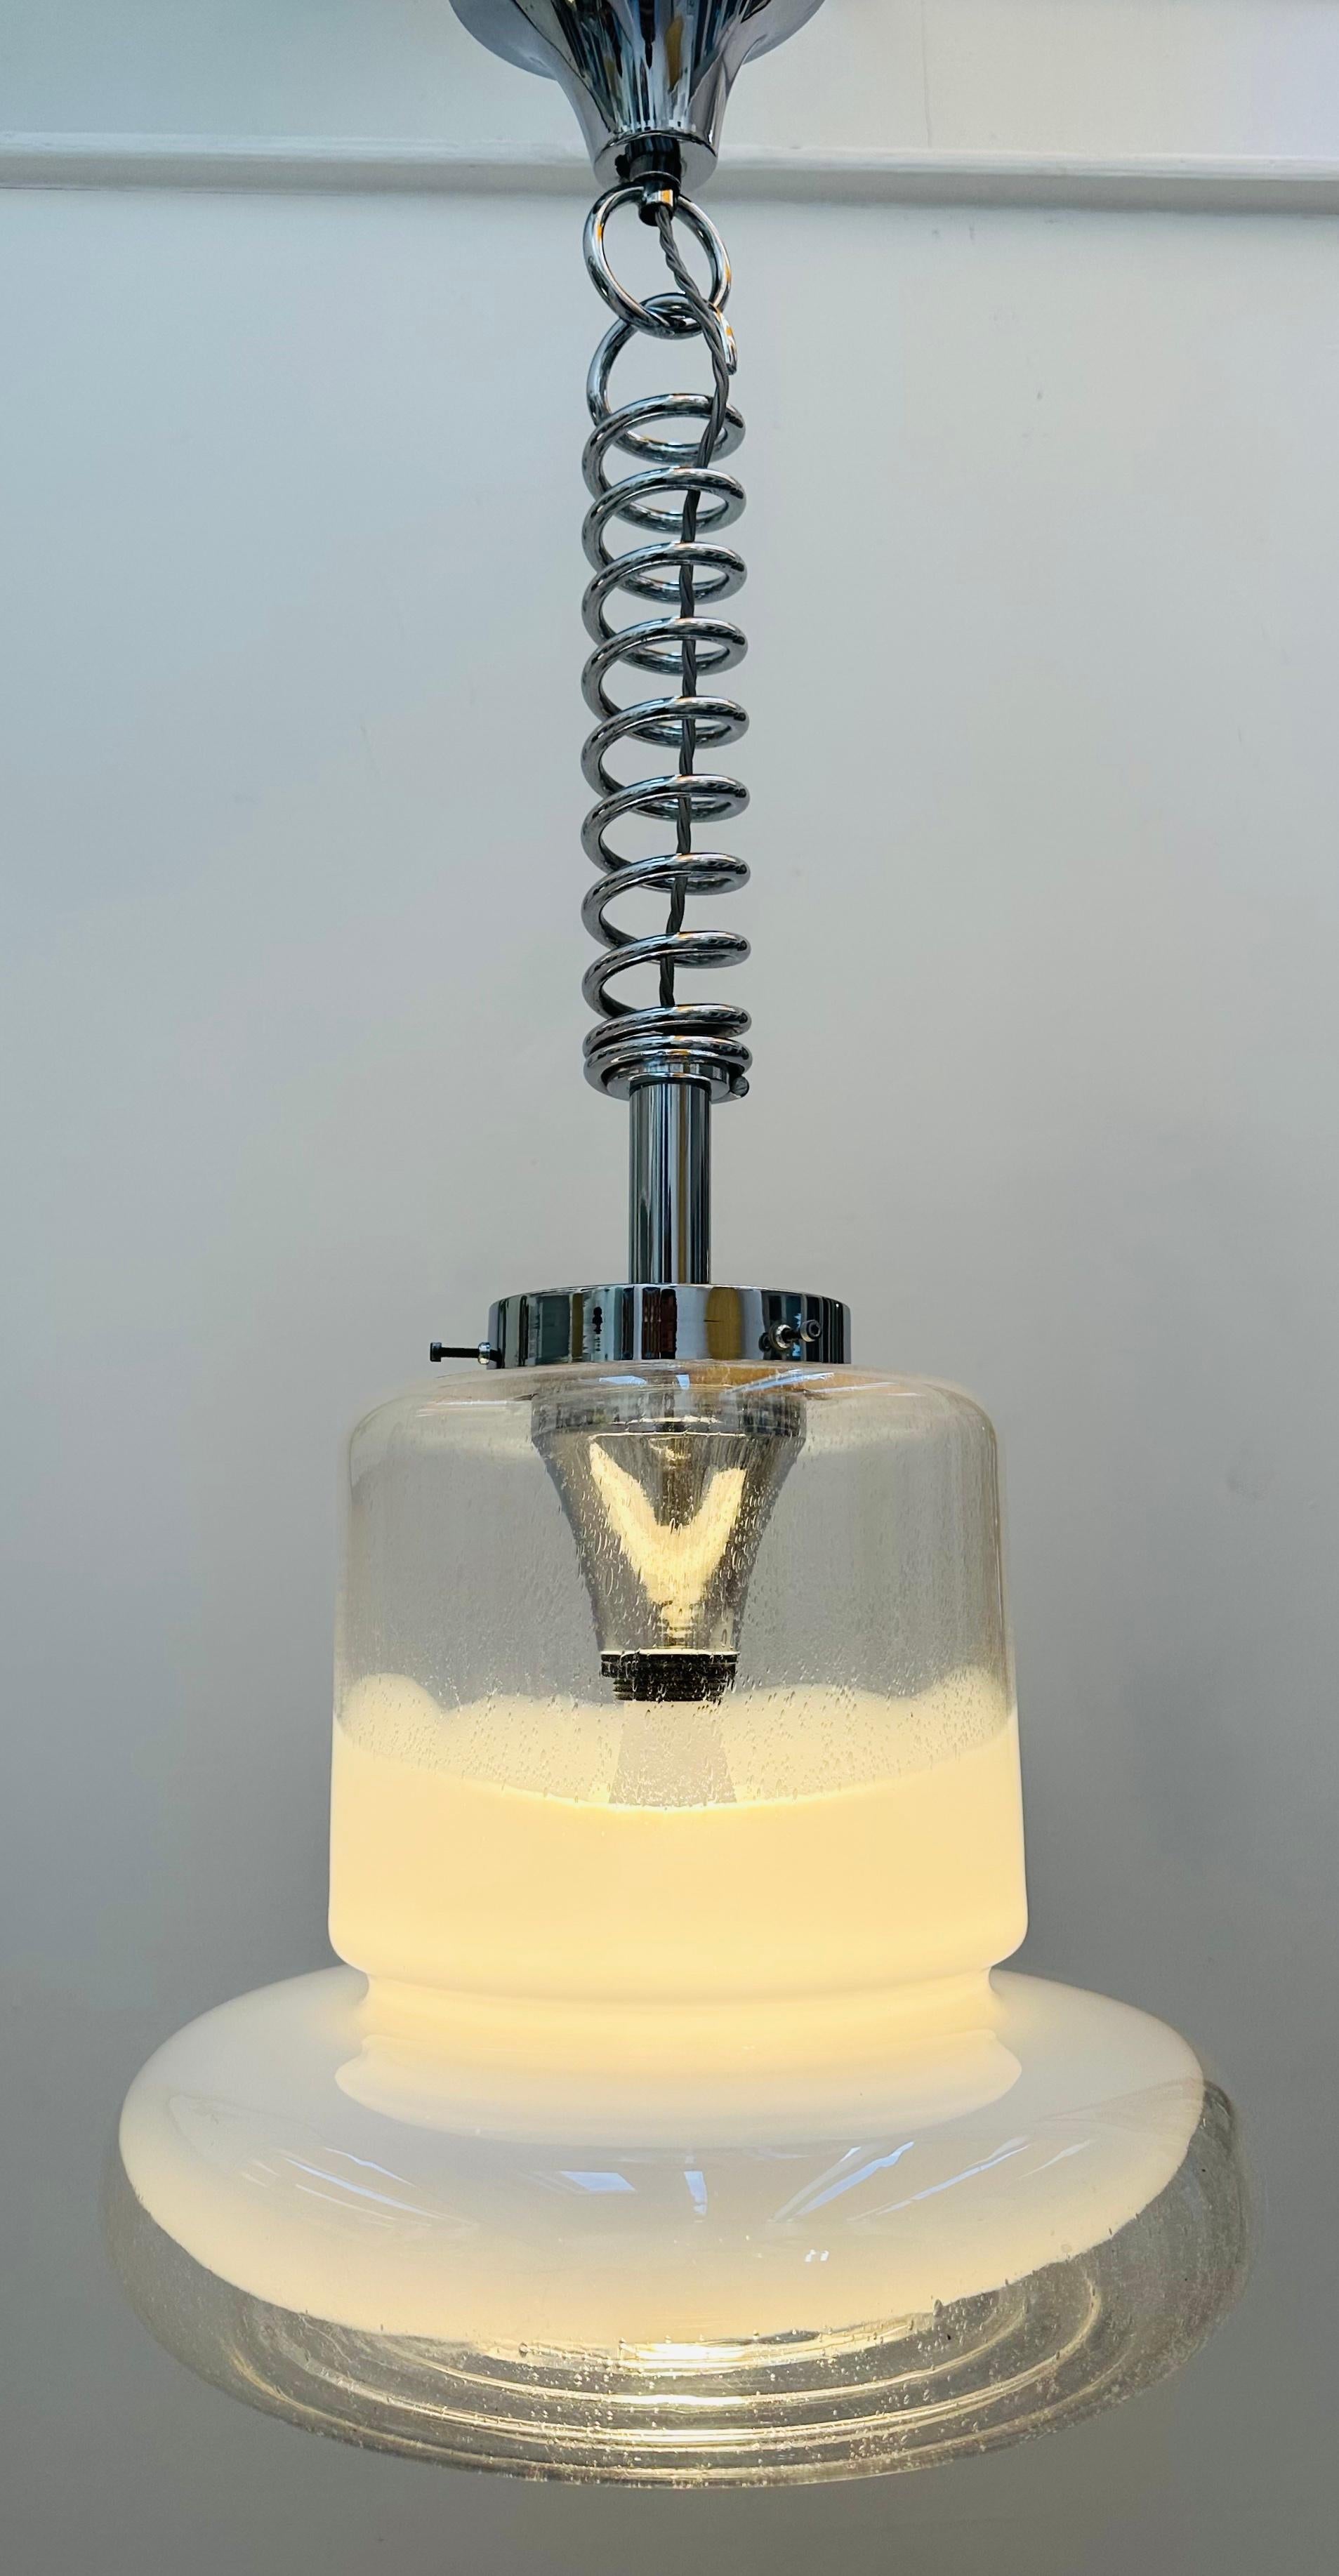 1960s Italian Murano glass ceiling pendant light designed by Carlo Nason for Mazzega.  A beautifully designed and futuristic design with clear glass at the top of the cylindrical shade with a wider bulbous ring. An opaque white swirled design around